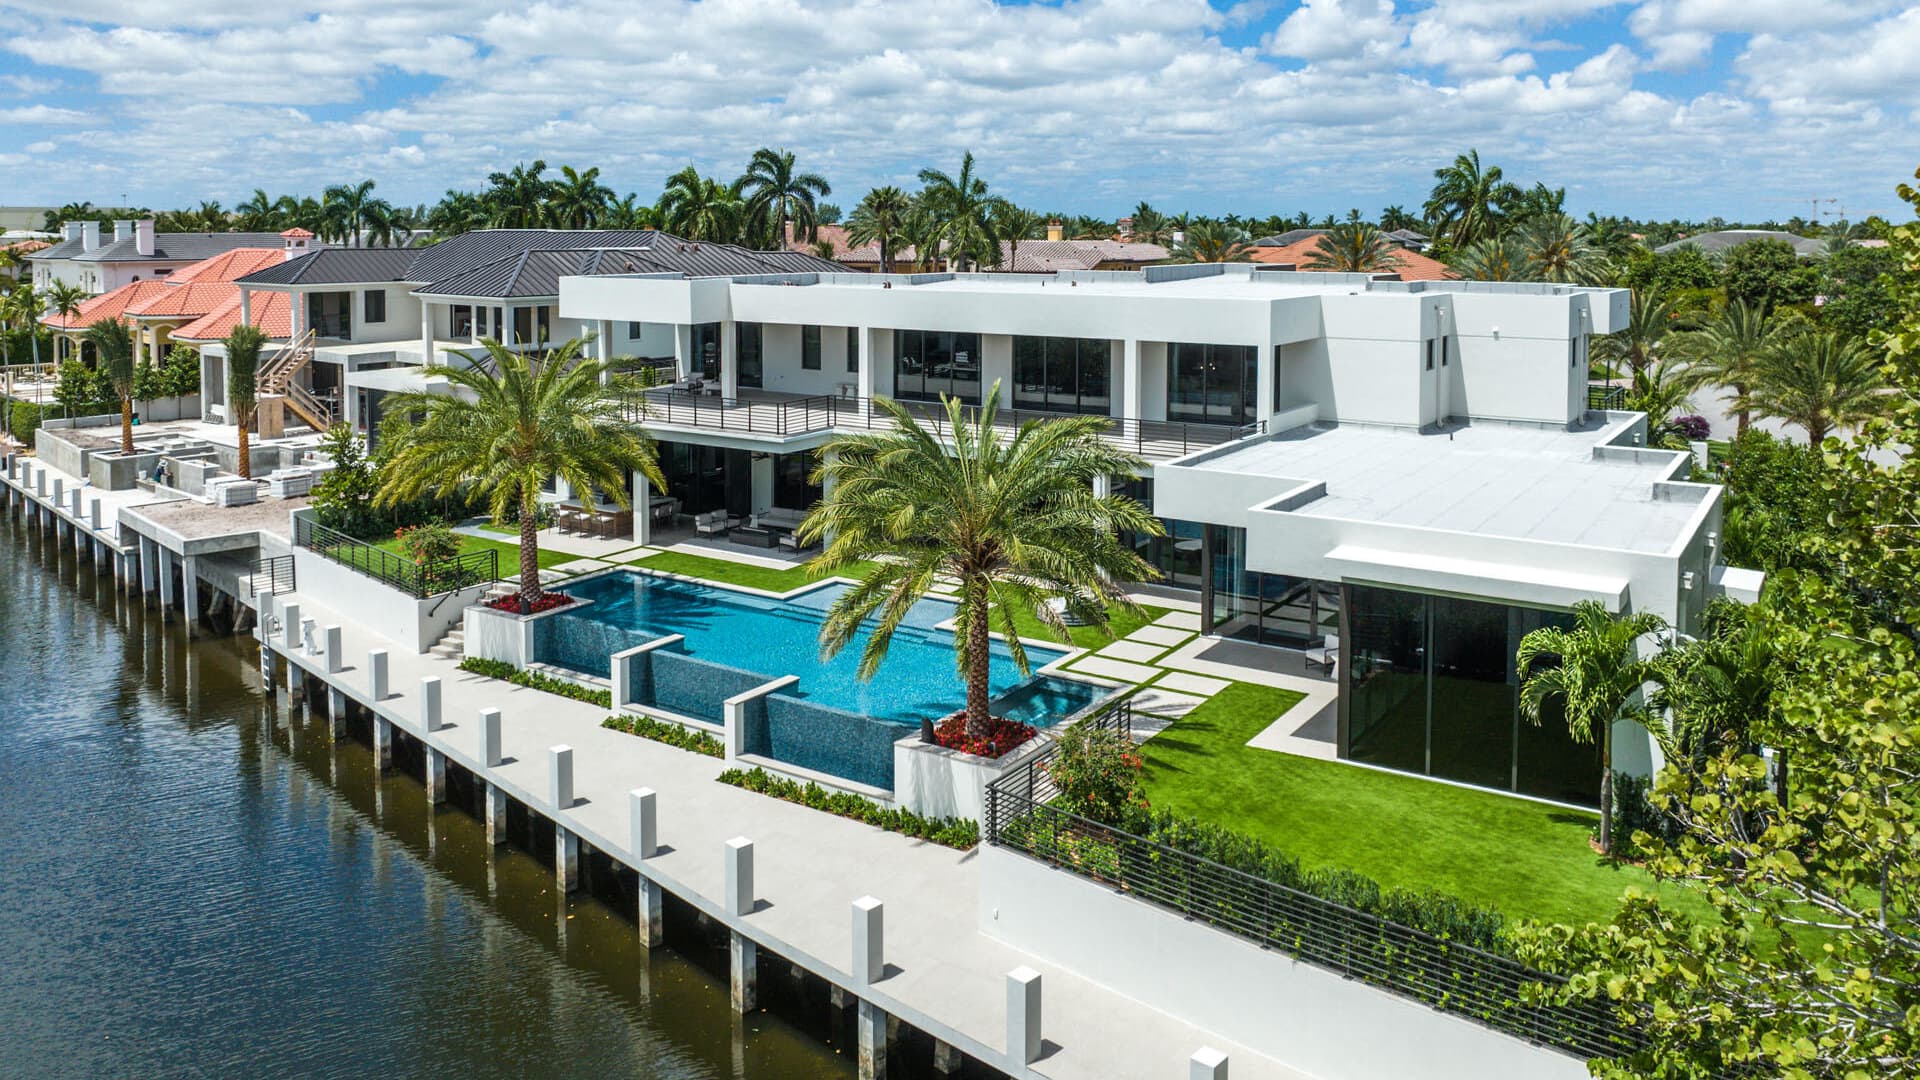 A look into the Boca Raton mansions that have prices on Miami Beach